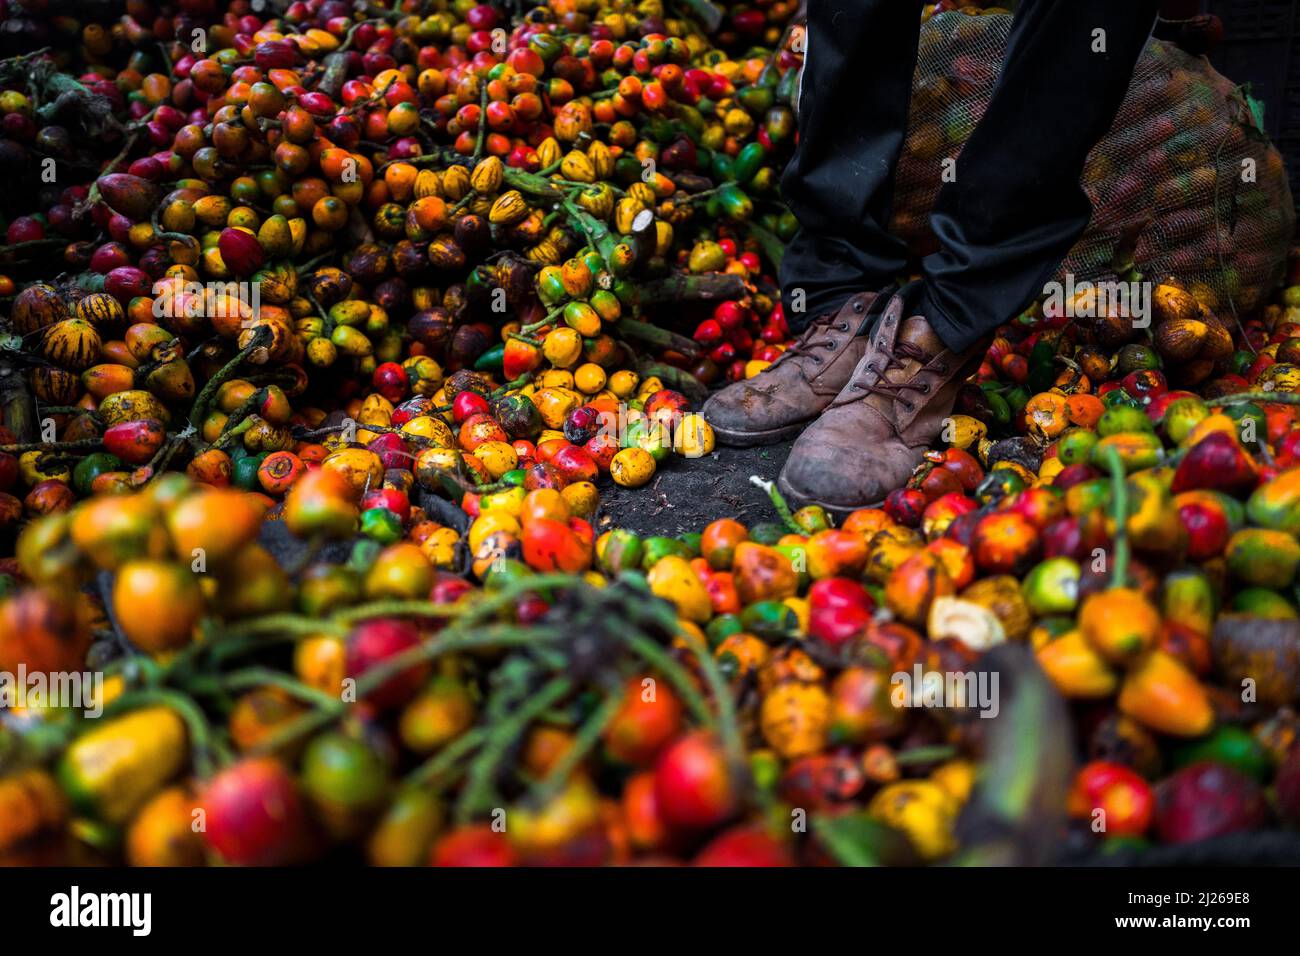 A Colombian worker stands inside a cargo truck, fully loaded with chontaduro (peach palm) fruits, in a processing facility in Cali, Colombia. Stock Photo